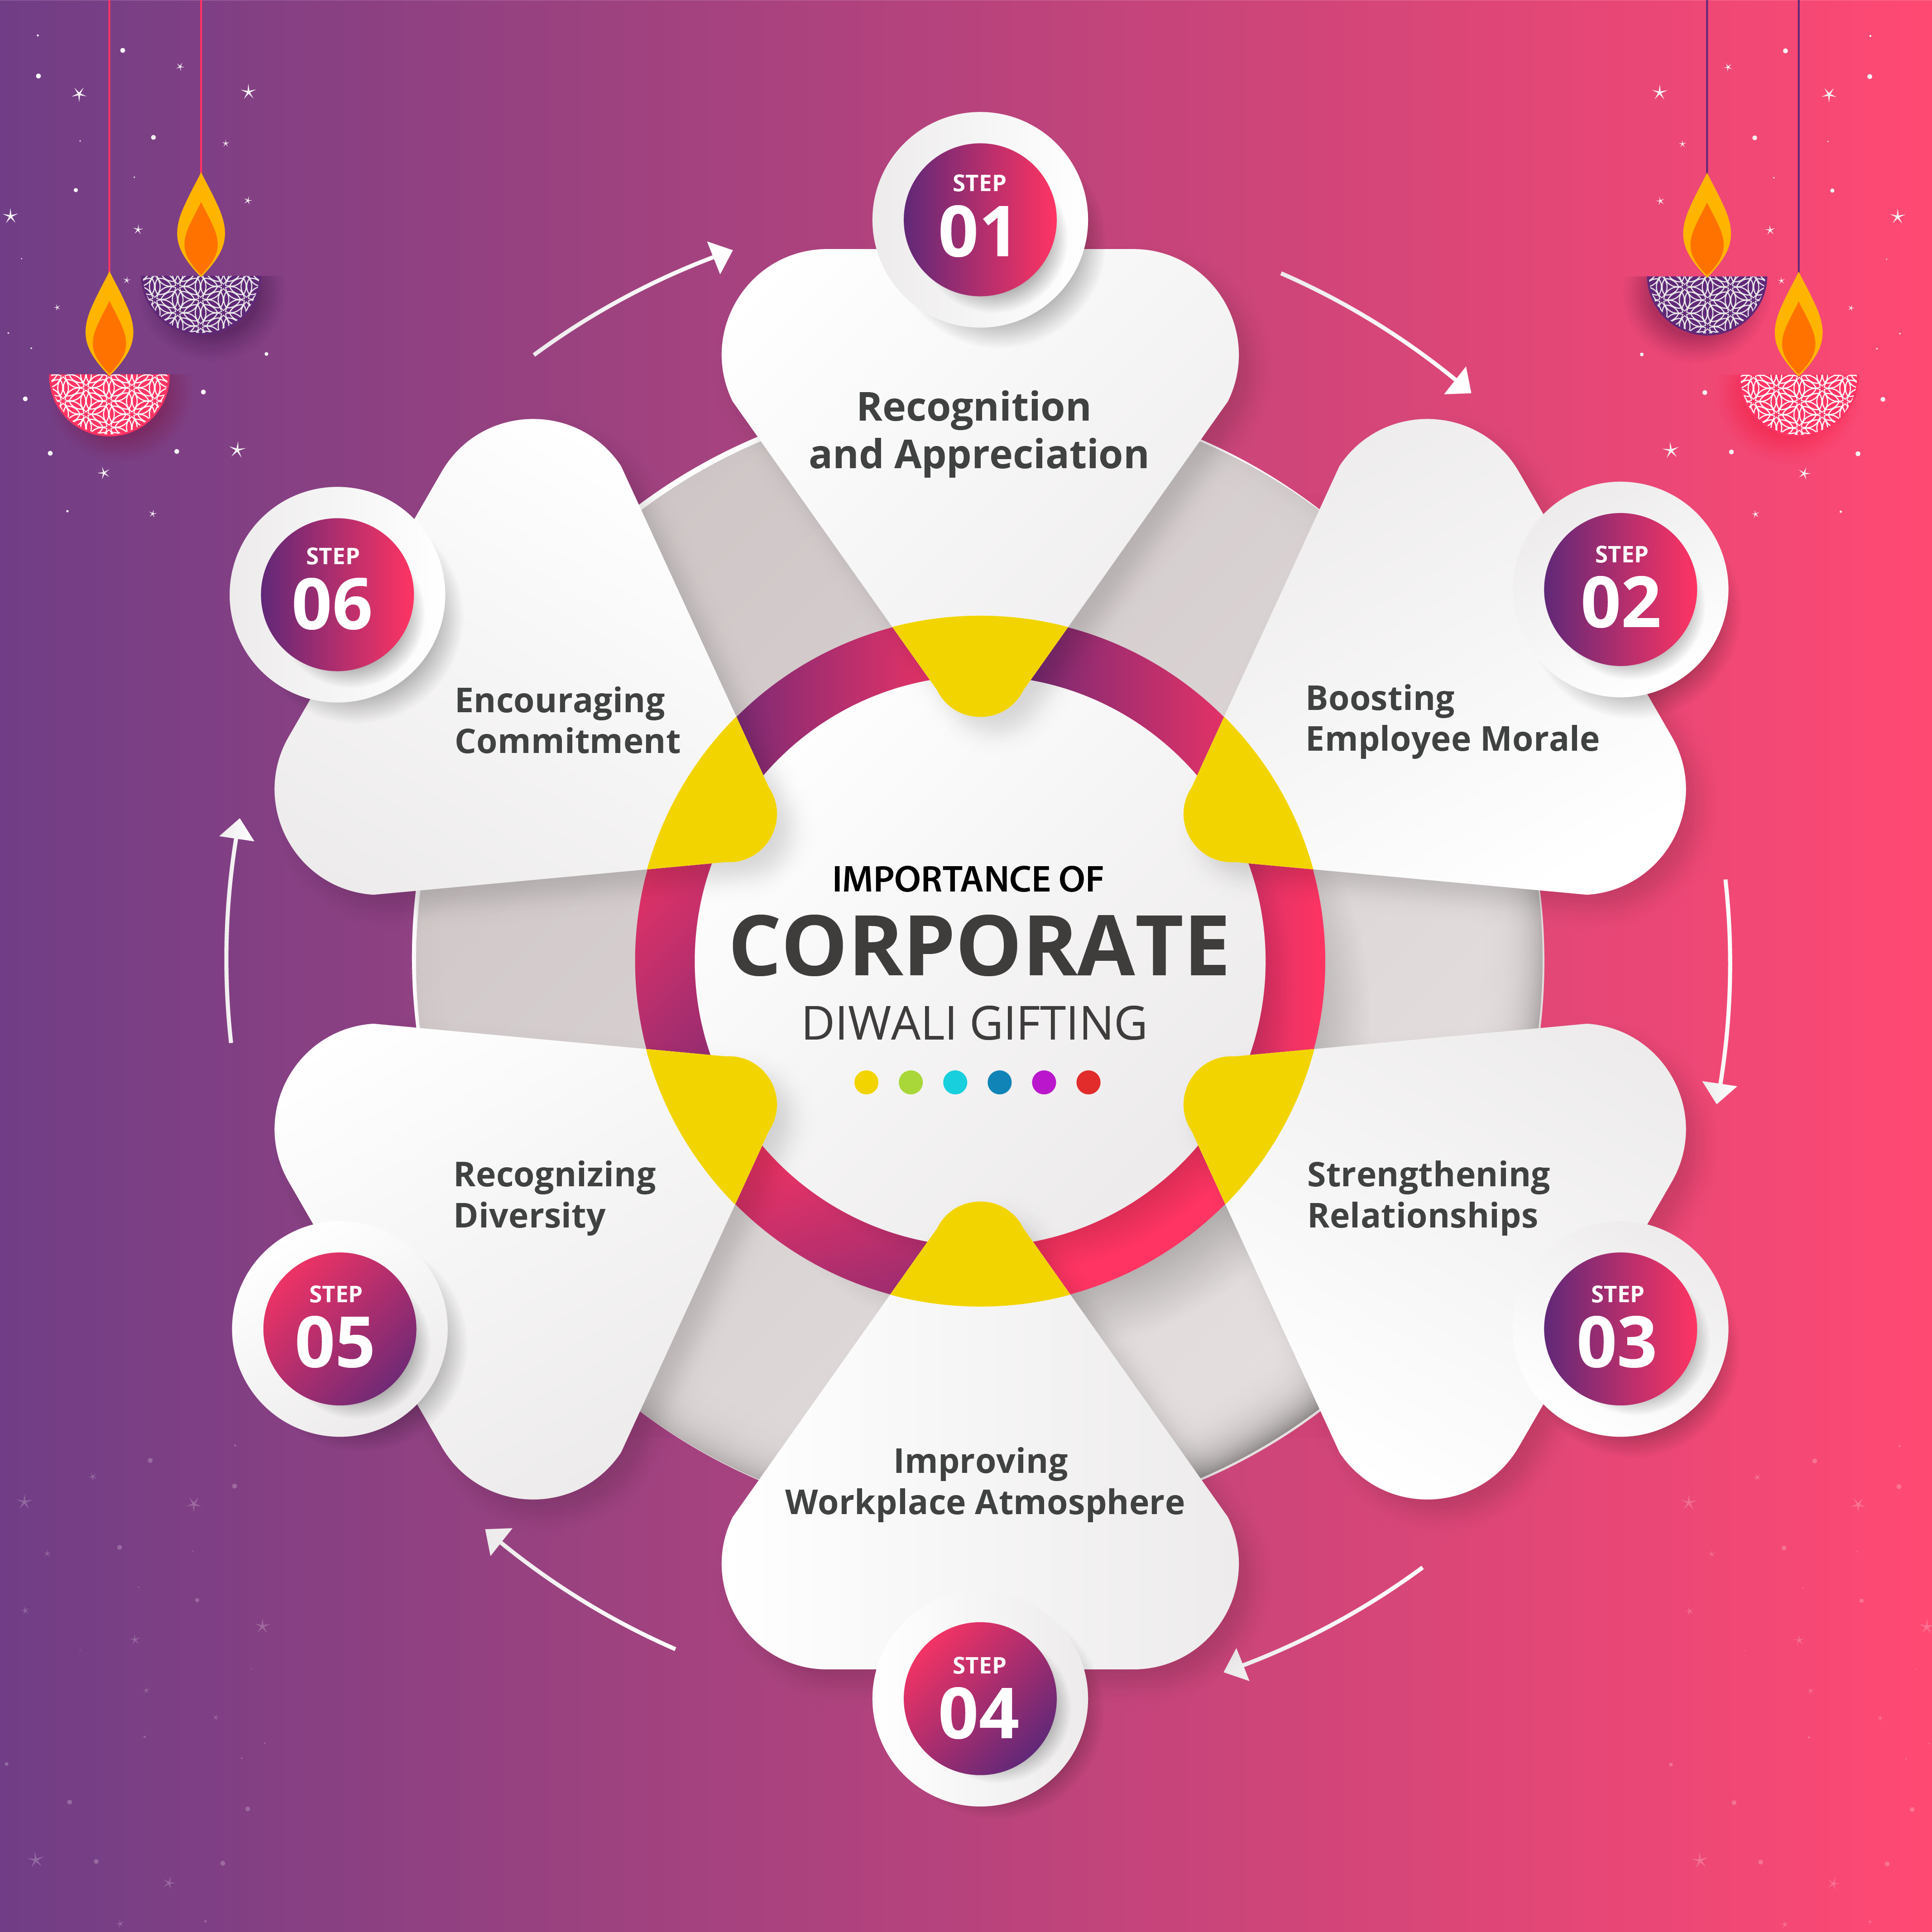 Defining the Importance of Corporate Diwali Gifting